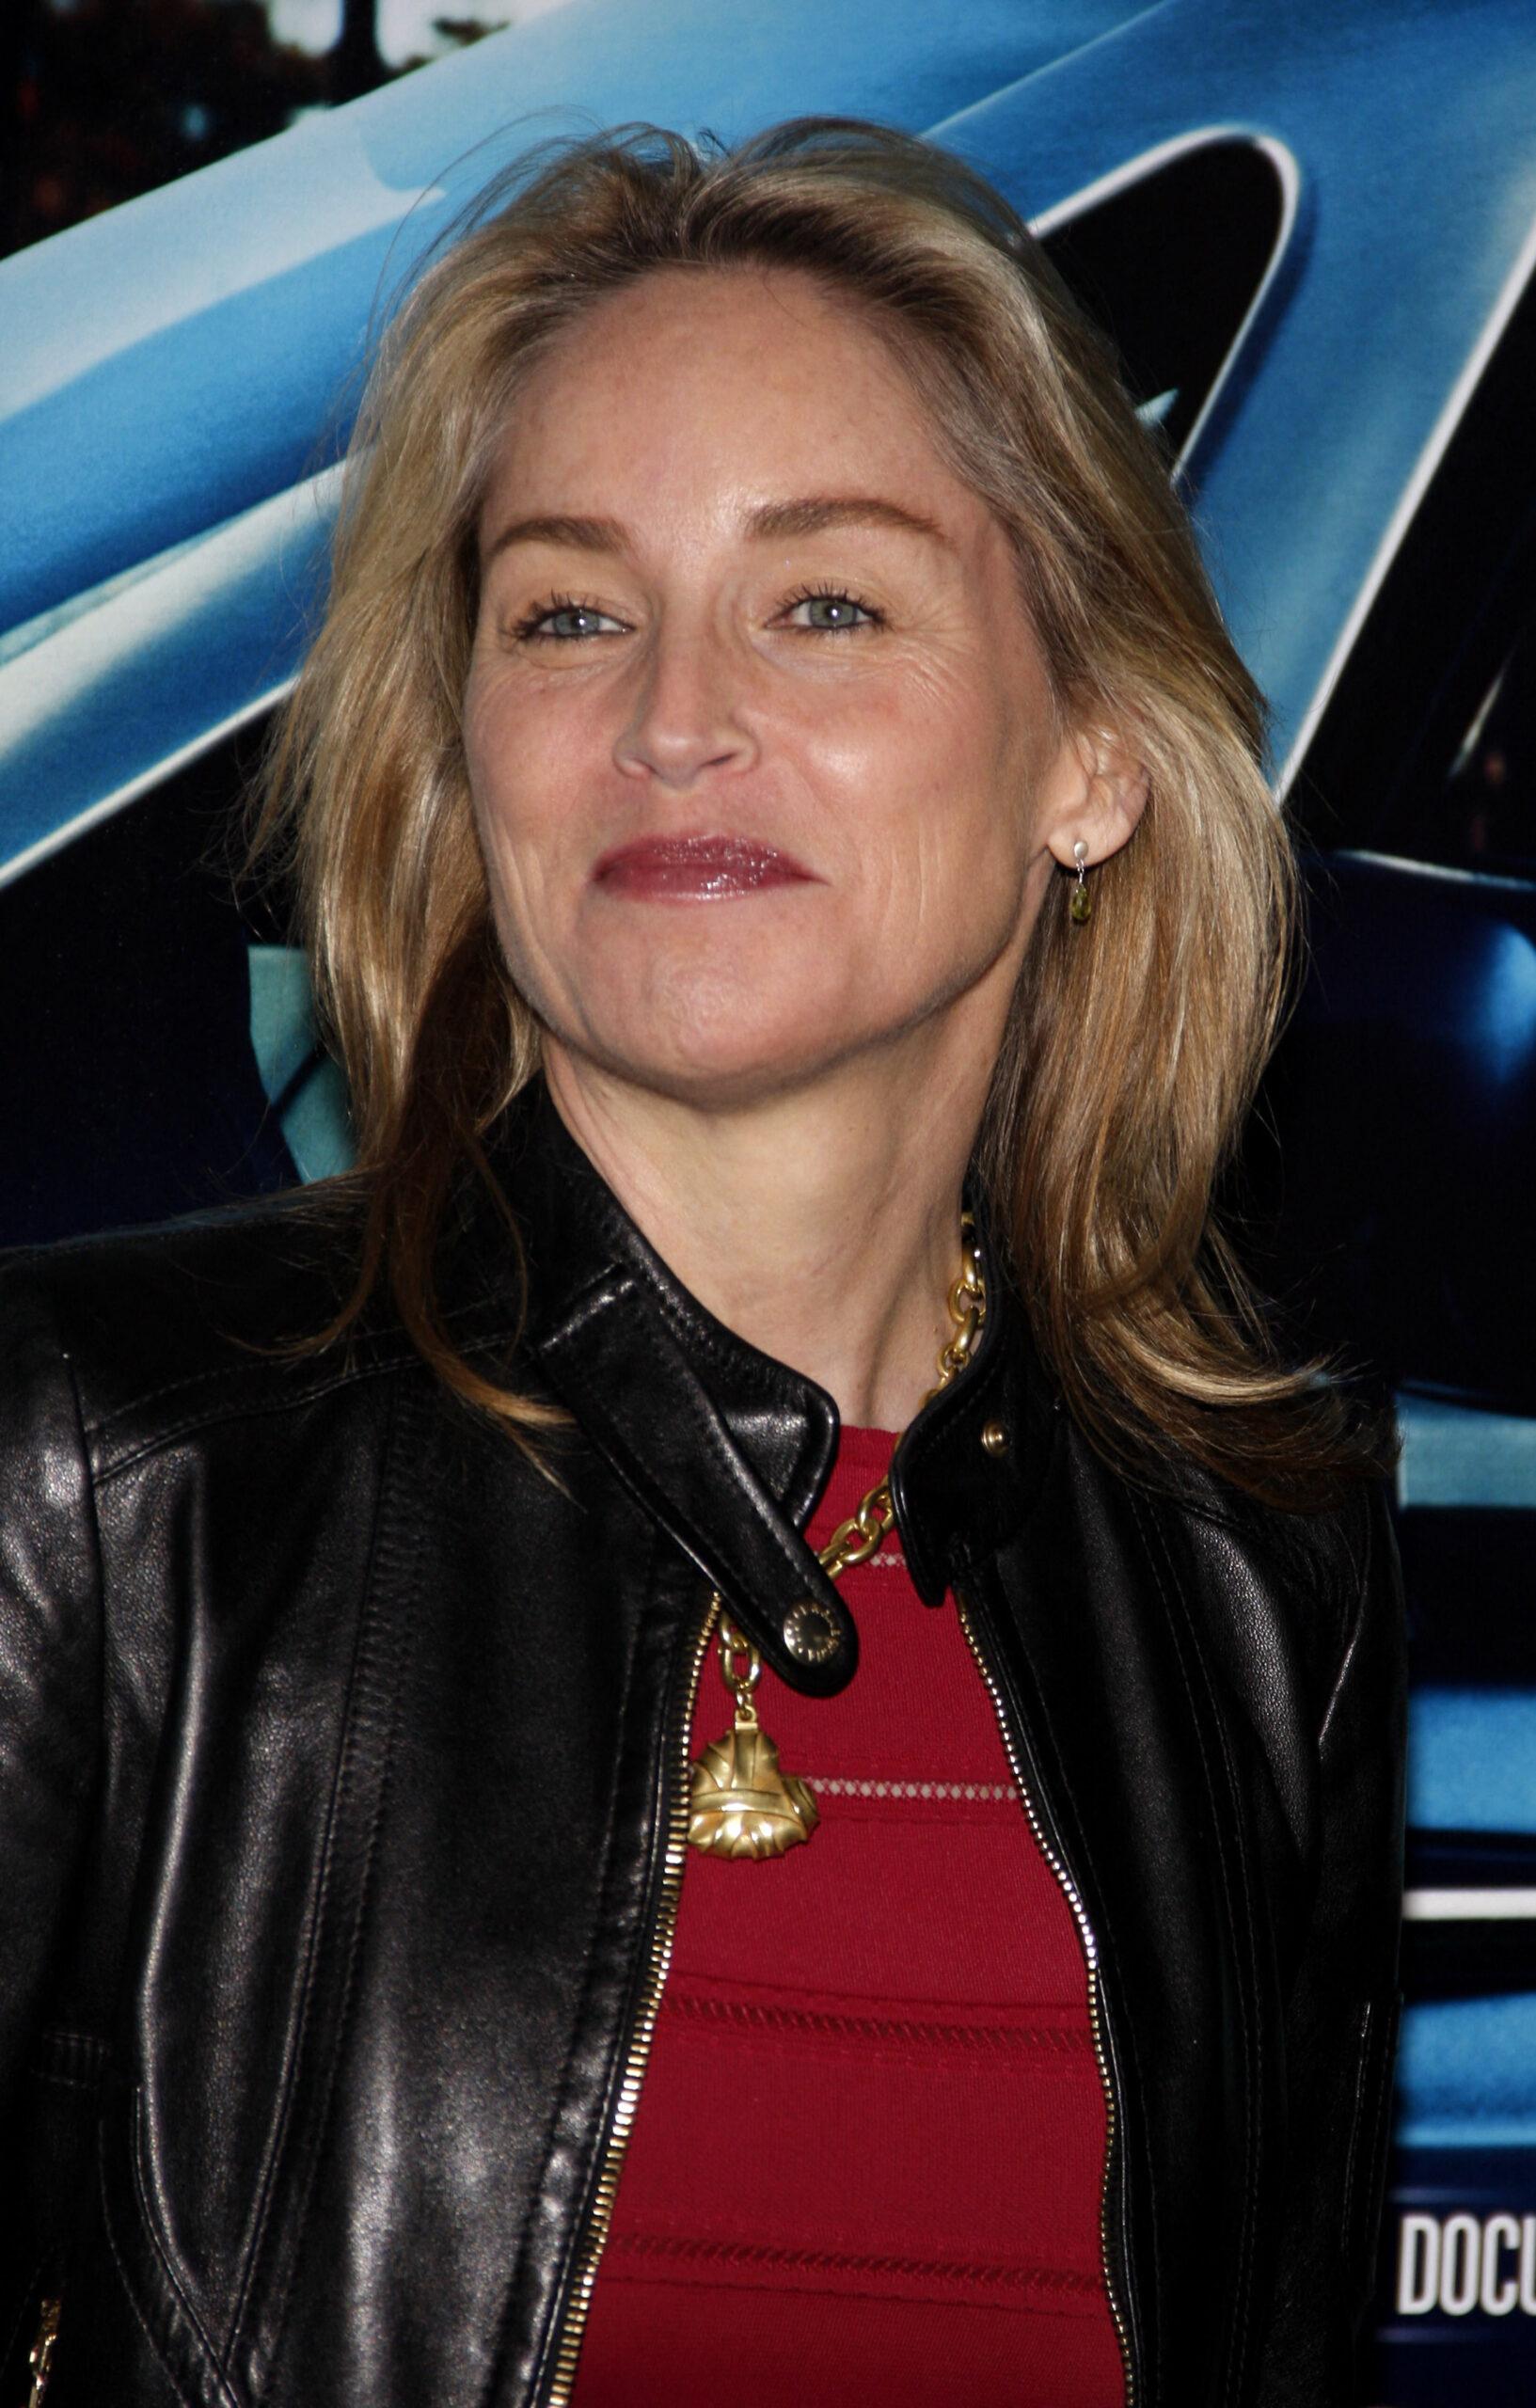 Sharon Stone attends Los Angeles premiere of HBO's 'His Way'